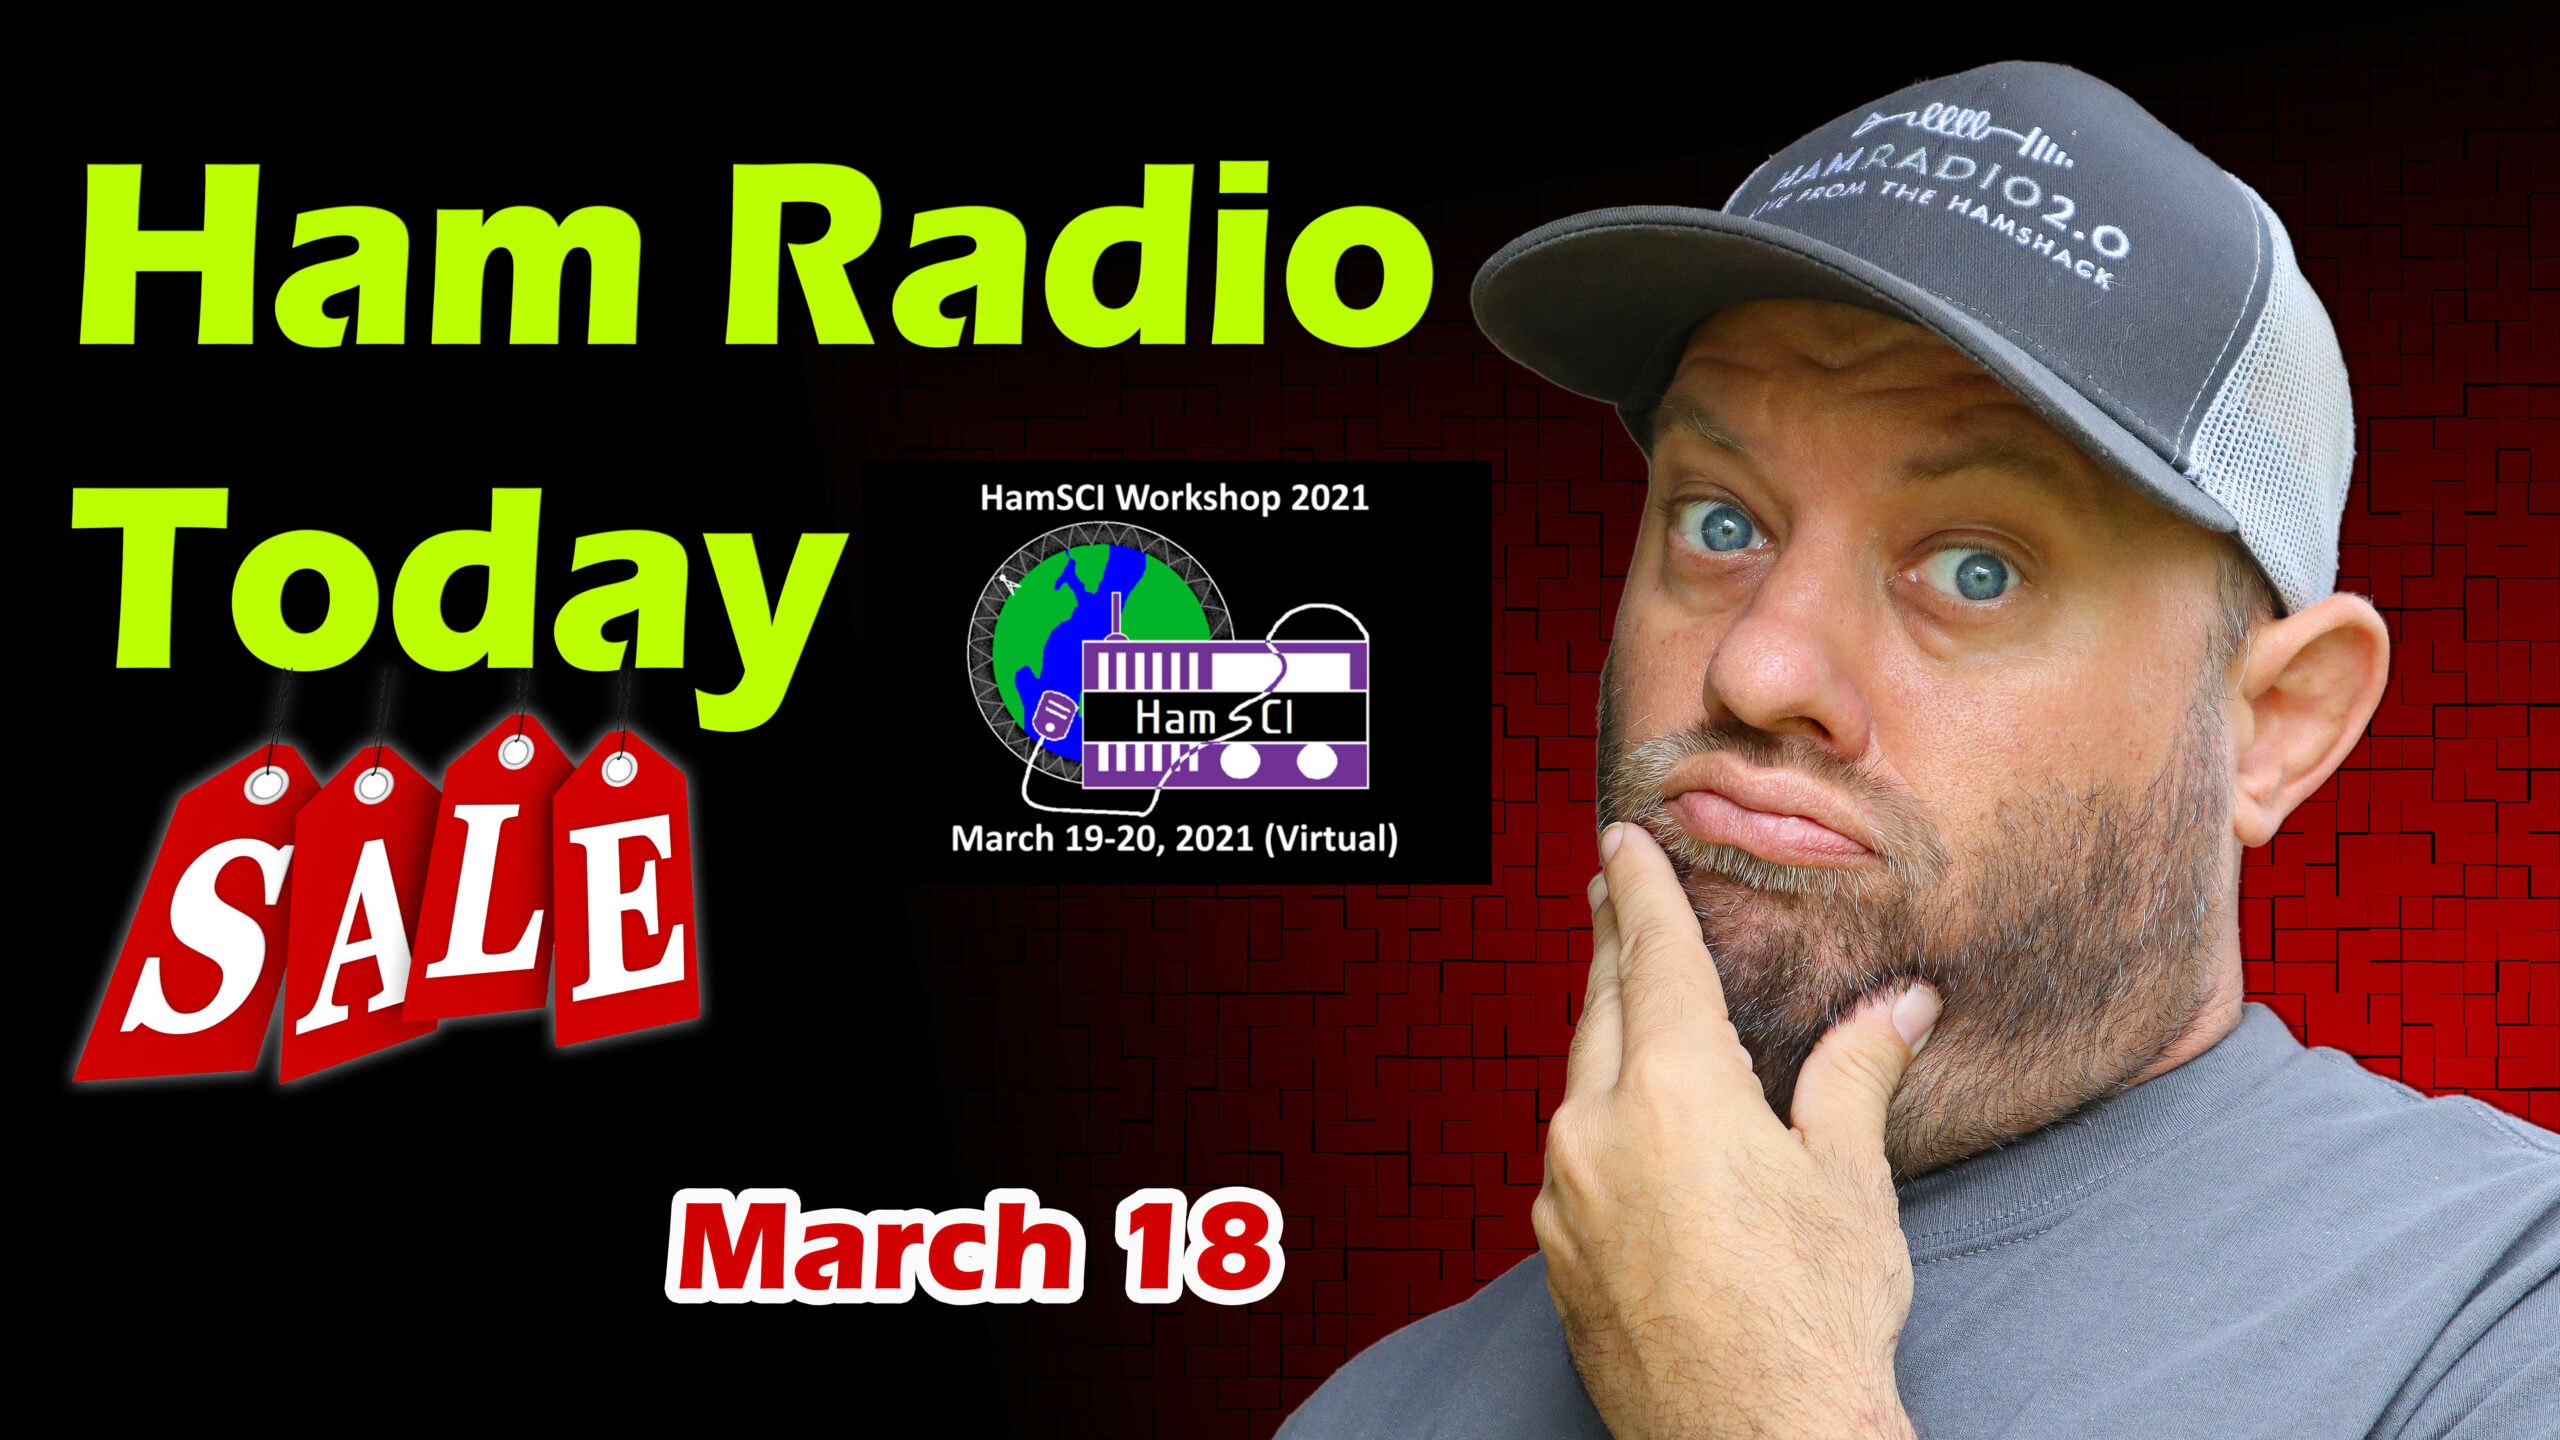 Episode 575: Ham Radio Today! Shopping Deals and Upcoming Events for March 18th